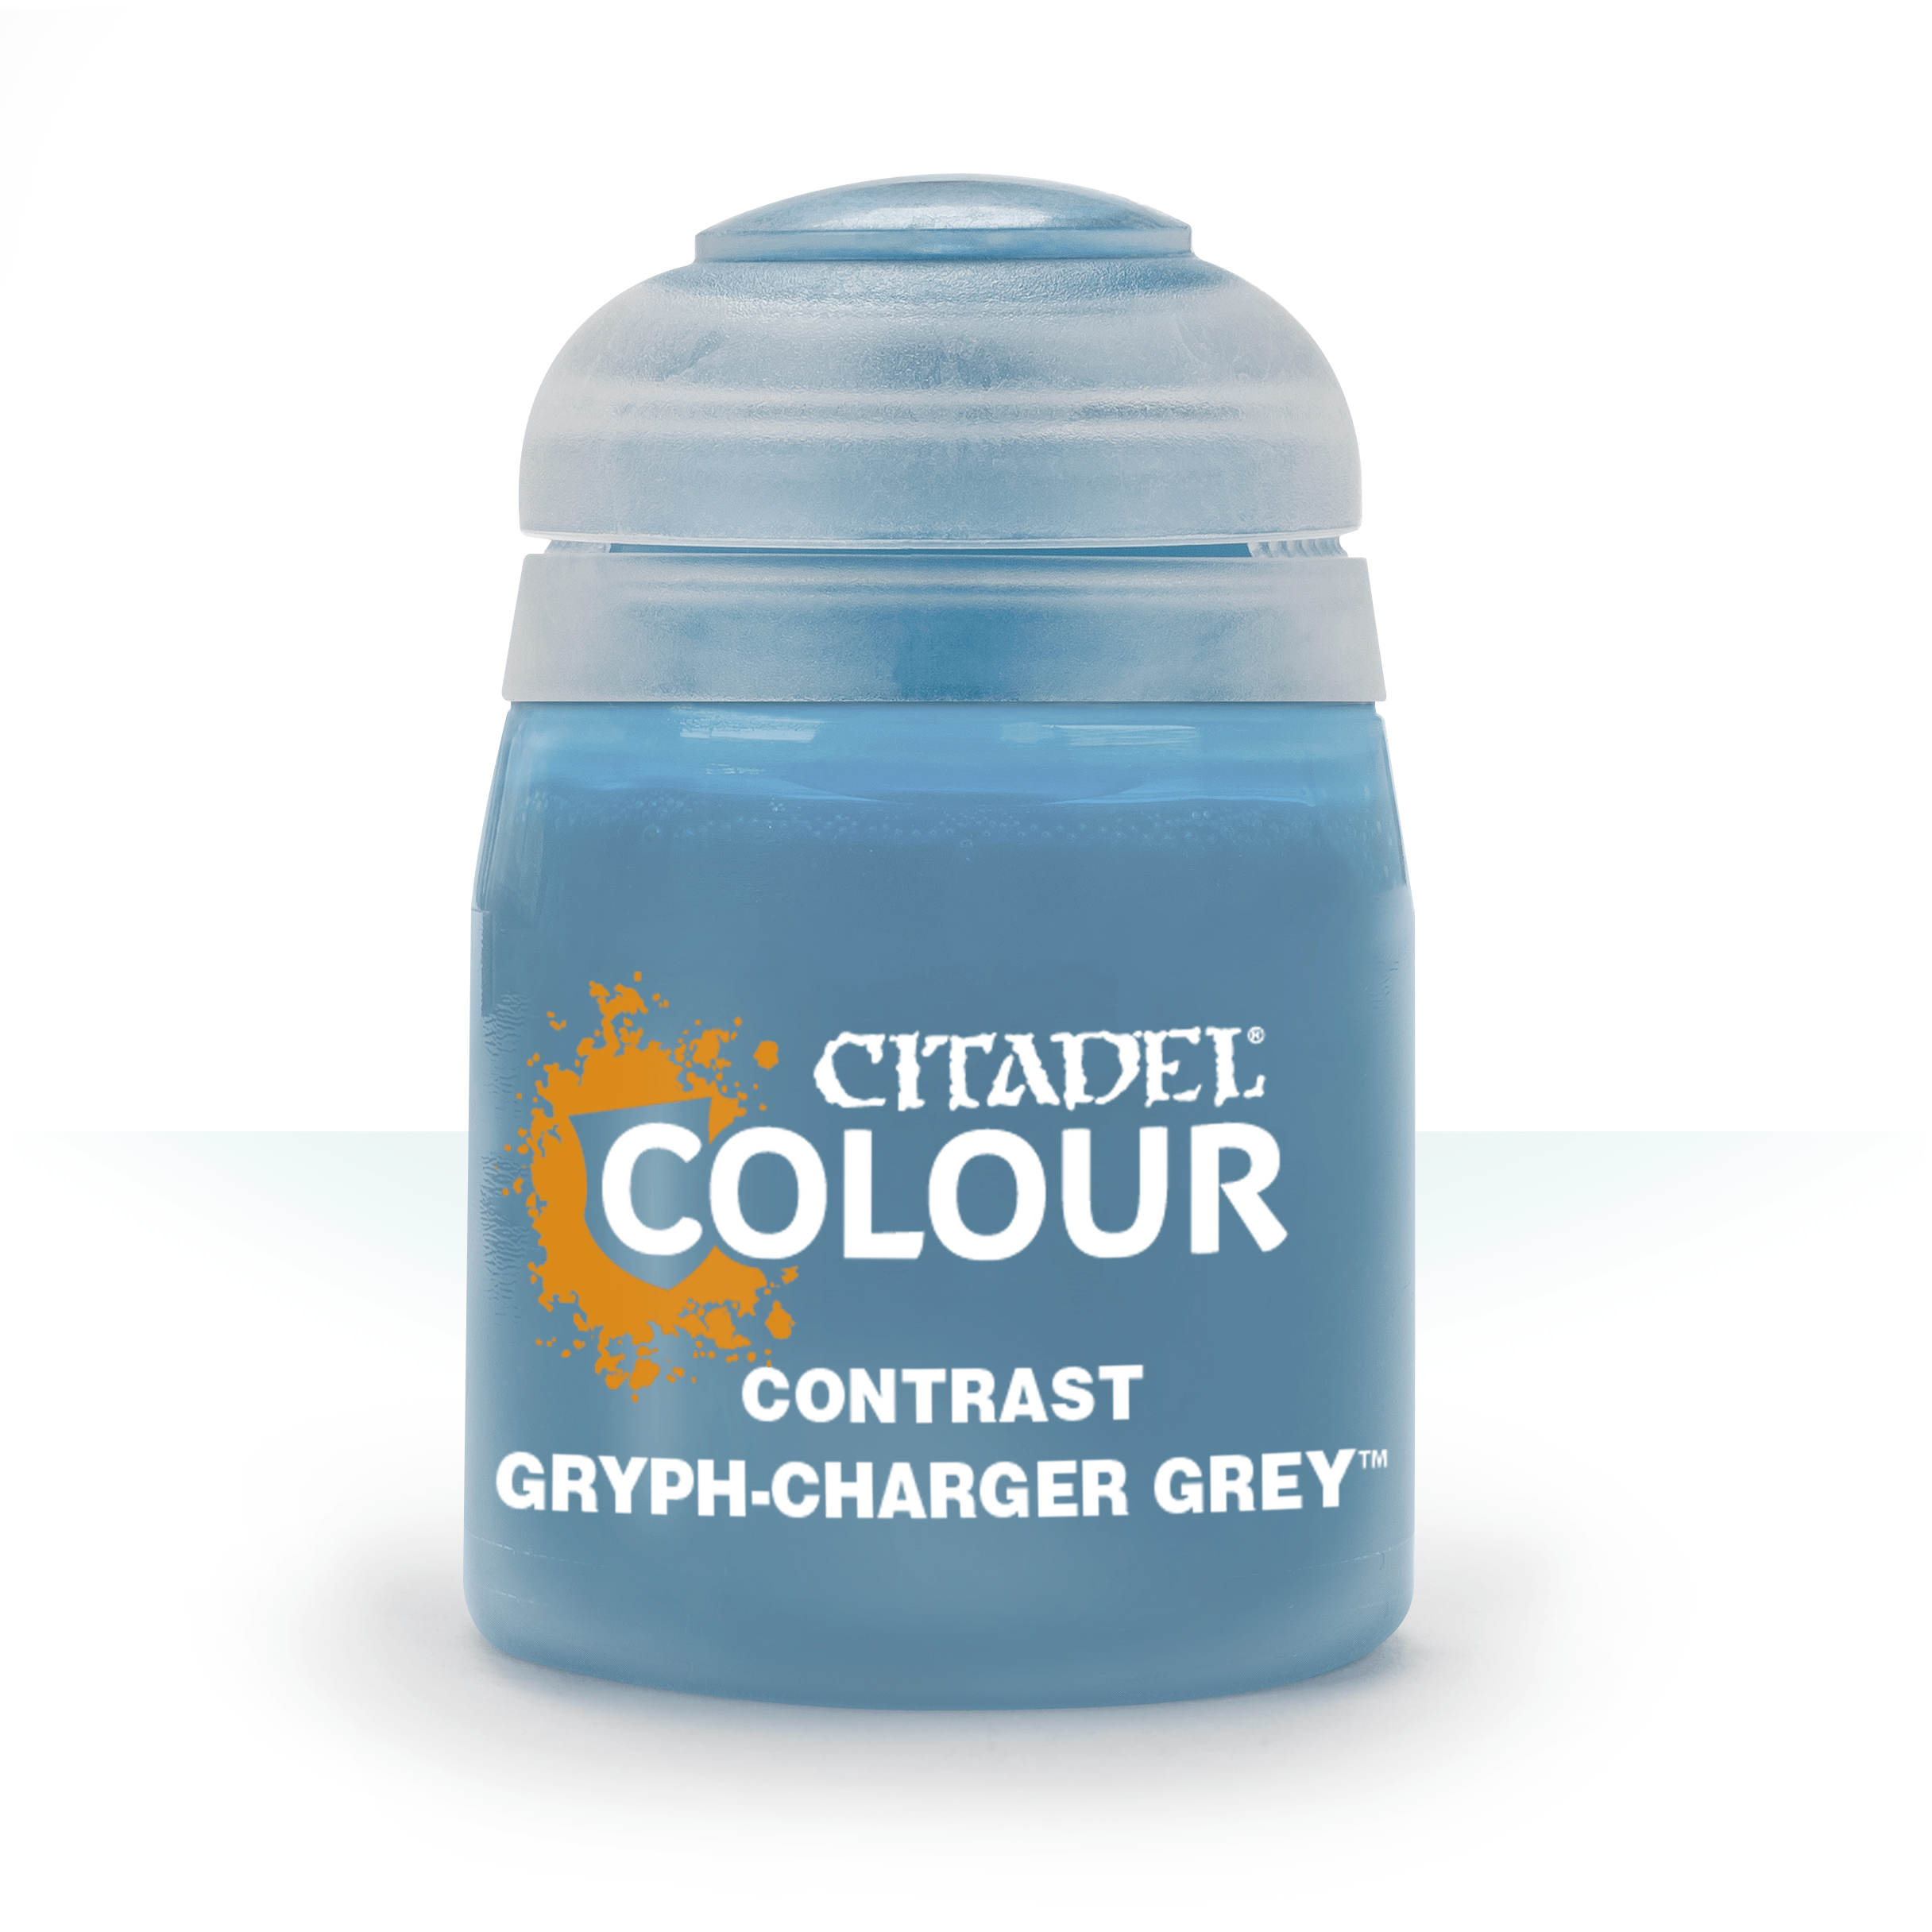 29-35 Contrast Gryph-Charger Grey 18ml